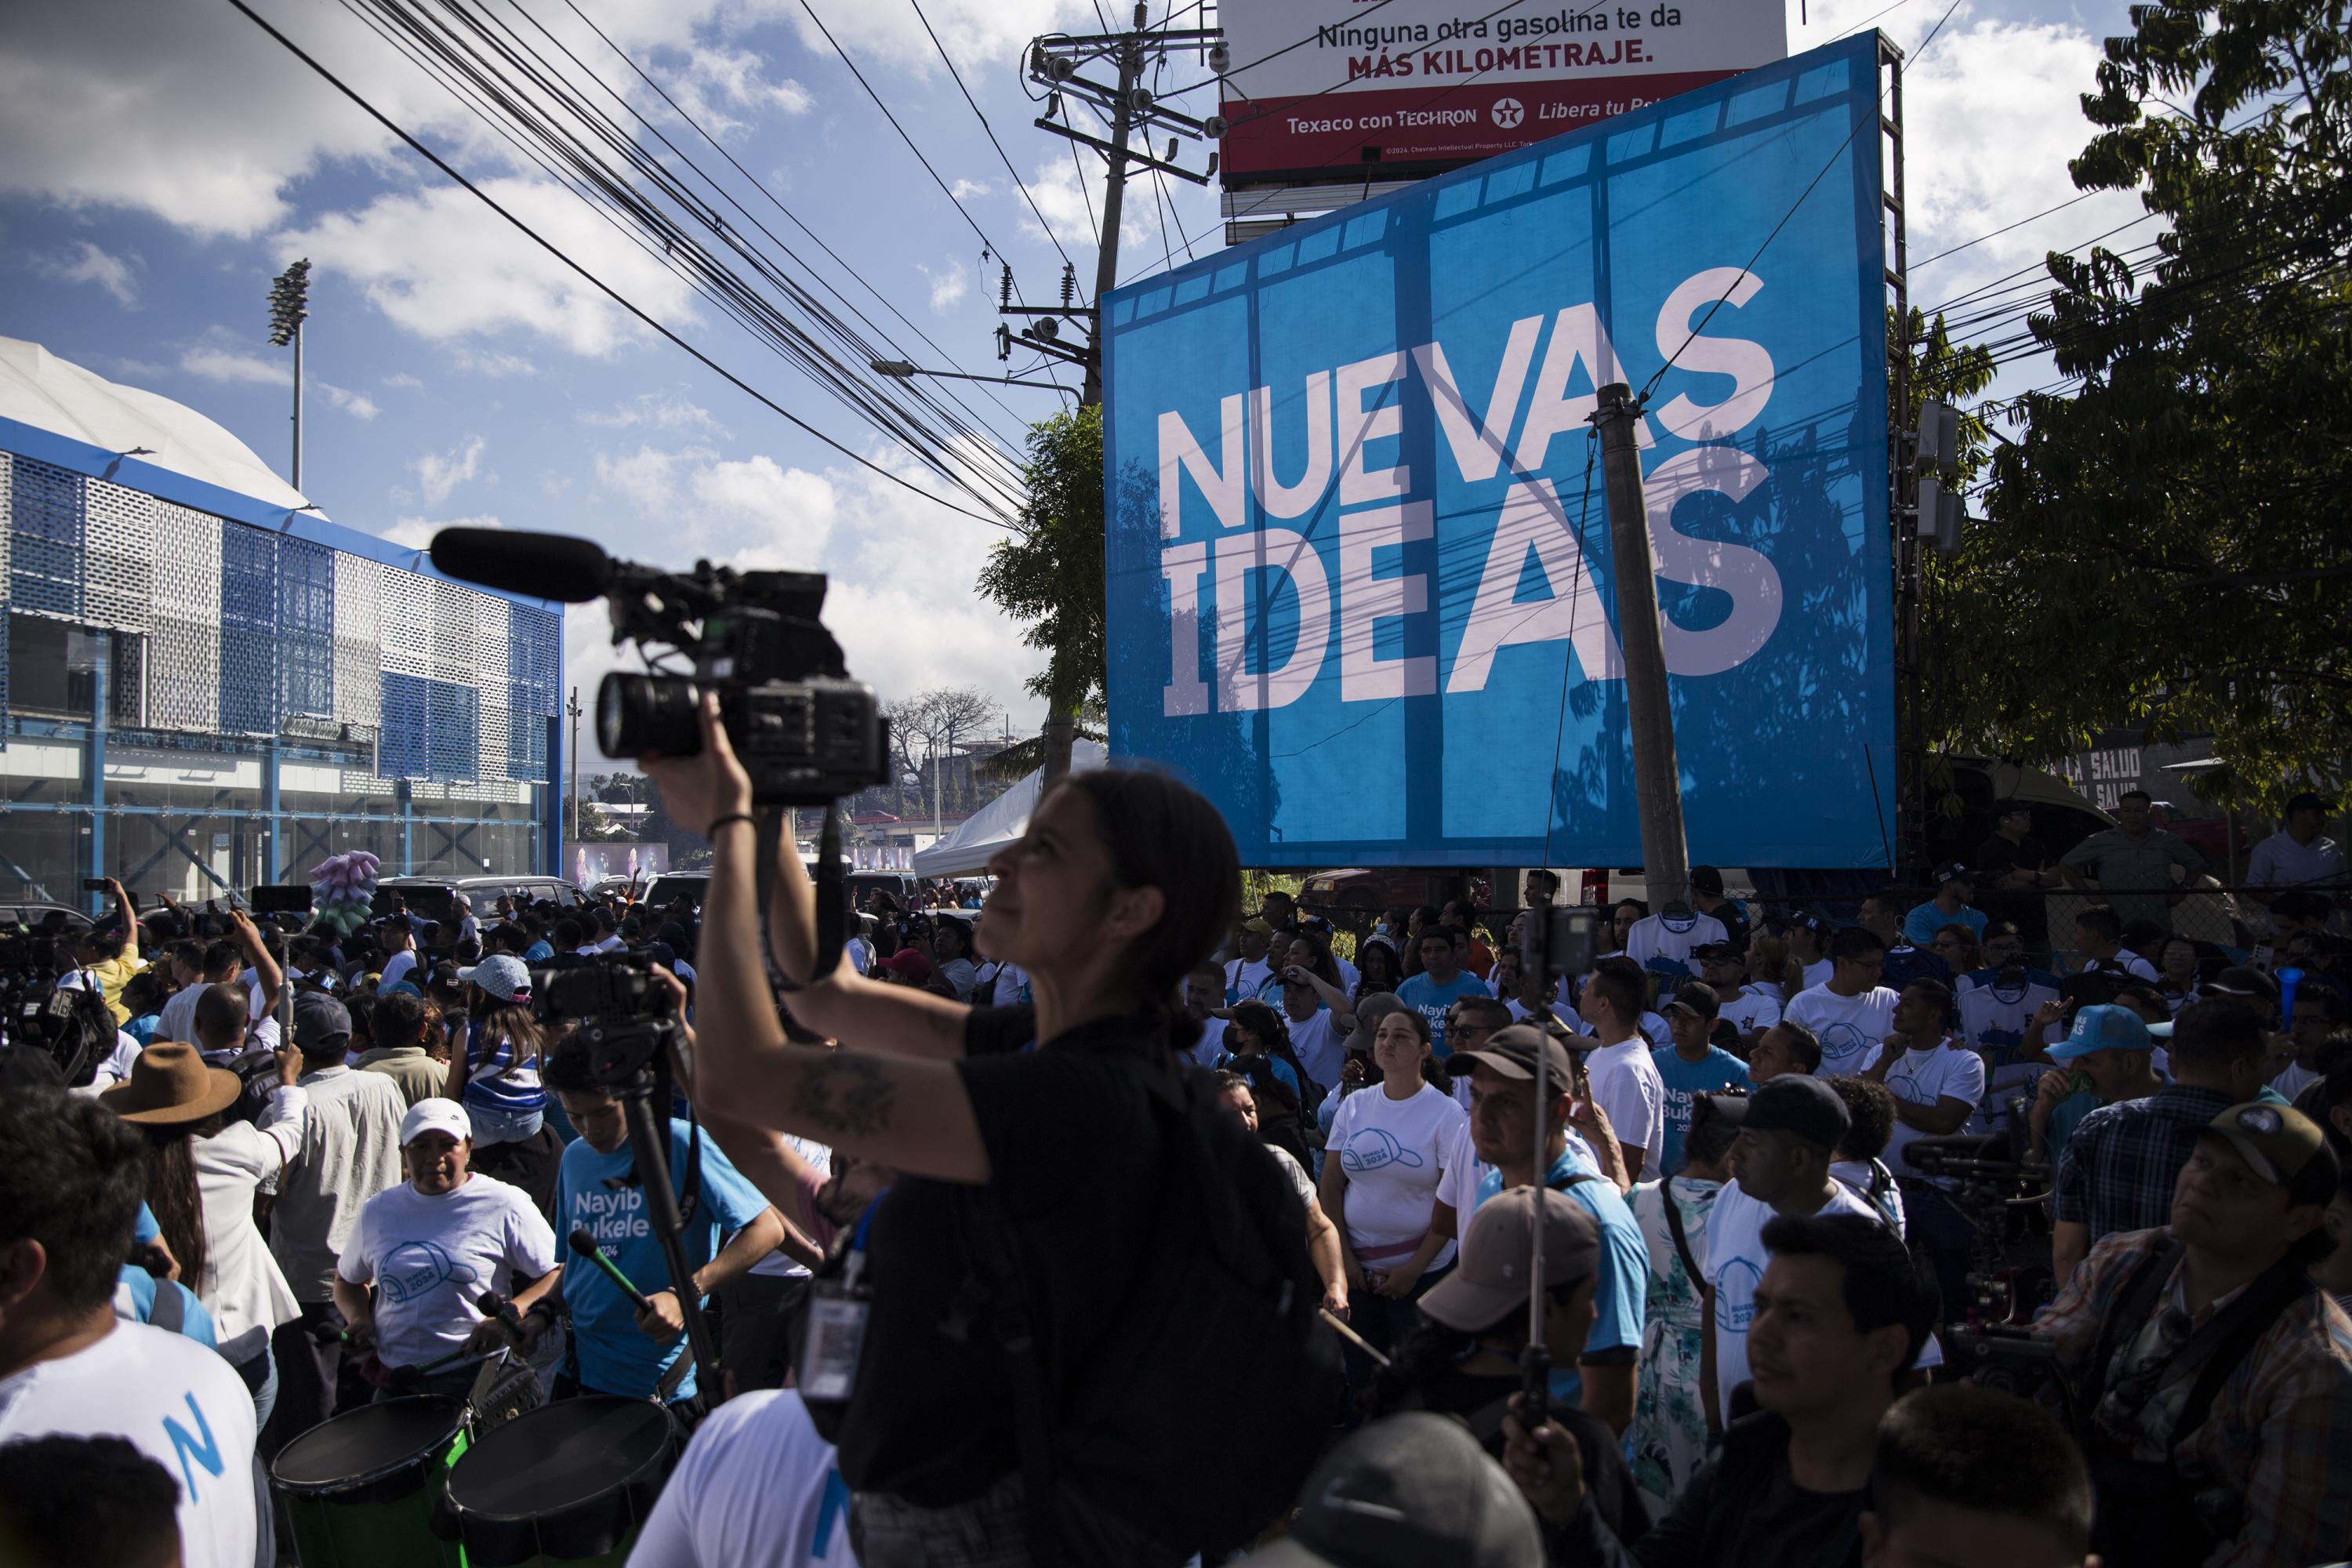 The governing party Nuevas Ideas was the only party to maintain mass presence and publicity in various voting centers around El Salvador. Photo Víctor Peña